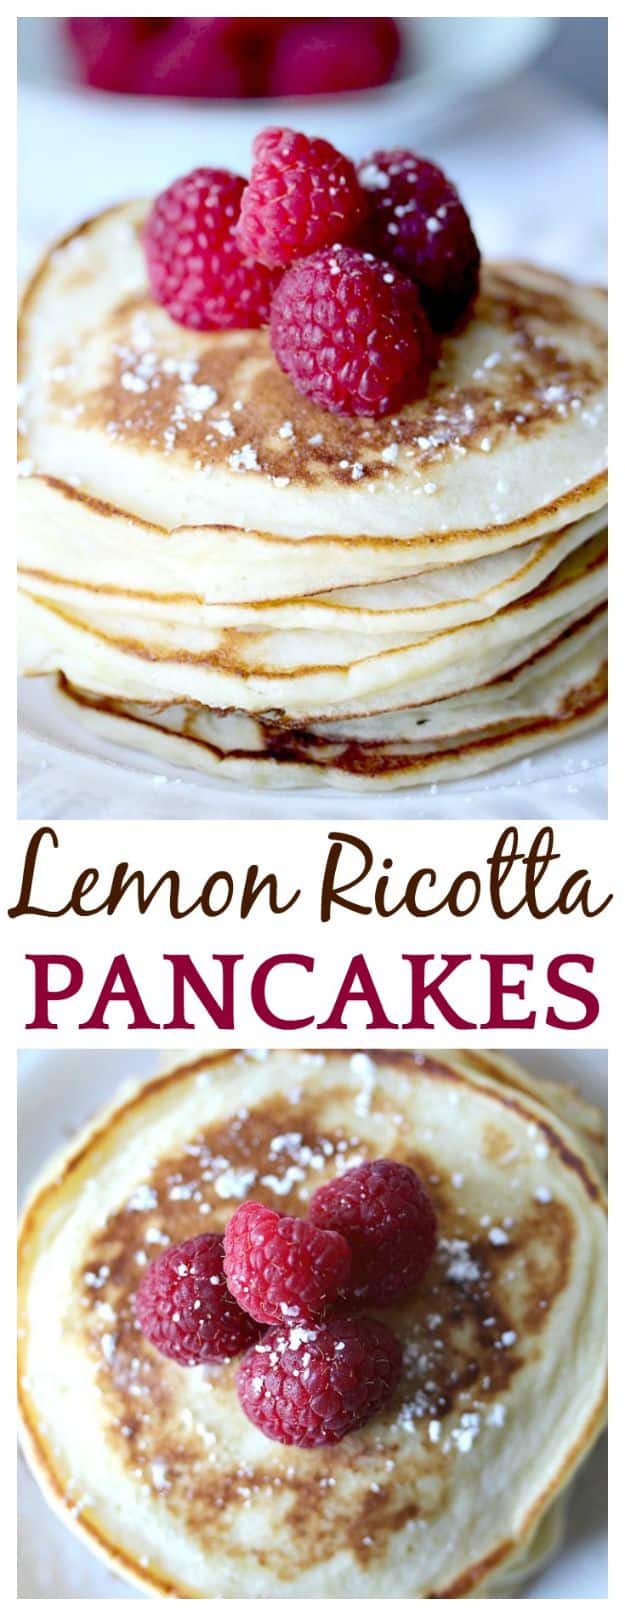 Best Pancake Recipes - Simple Lemon Ricotta Pancakes - Homemade Pancakes With Banana, Berries, Fruit and Maple Syrup - How To Make Pancake Mix at Home - Gluten Free, Low Fat and Healthy Recipes - Breakfast and Brunch Recipe Ideas - Silver Dollar, Buttermilk, Make Ahead and Quick Versions With Strawberries and Blueberries #pancakes #pancakerecipes #recipeideas #breakfast #breakfastrecipes http://diyjoy.com/pancake-recipes